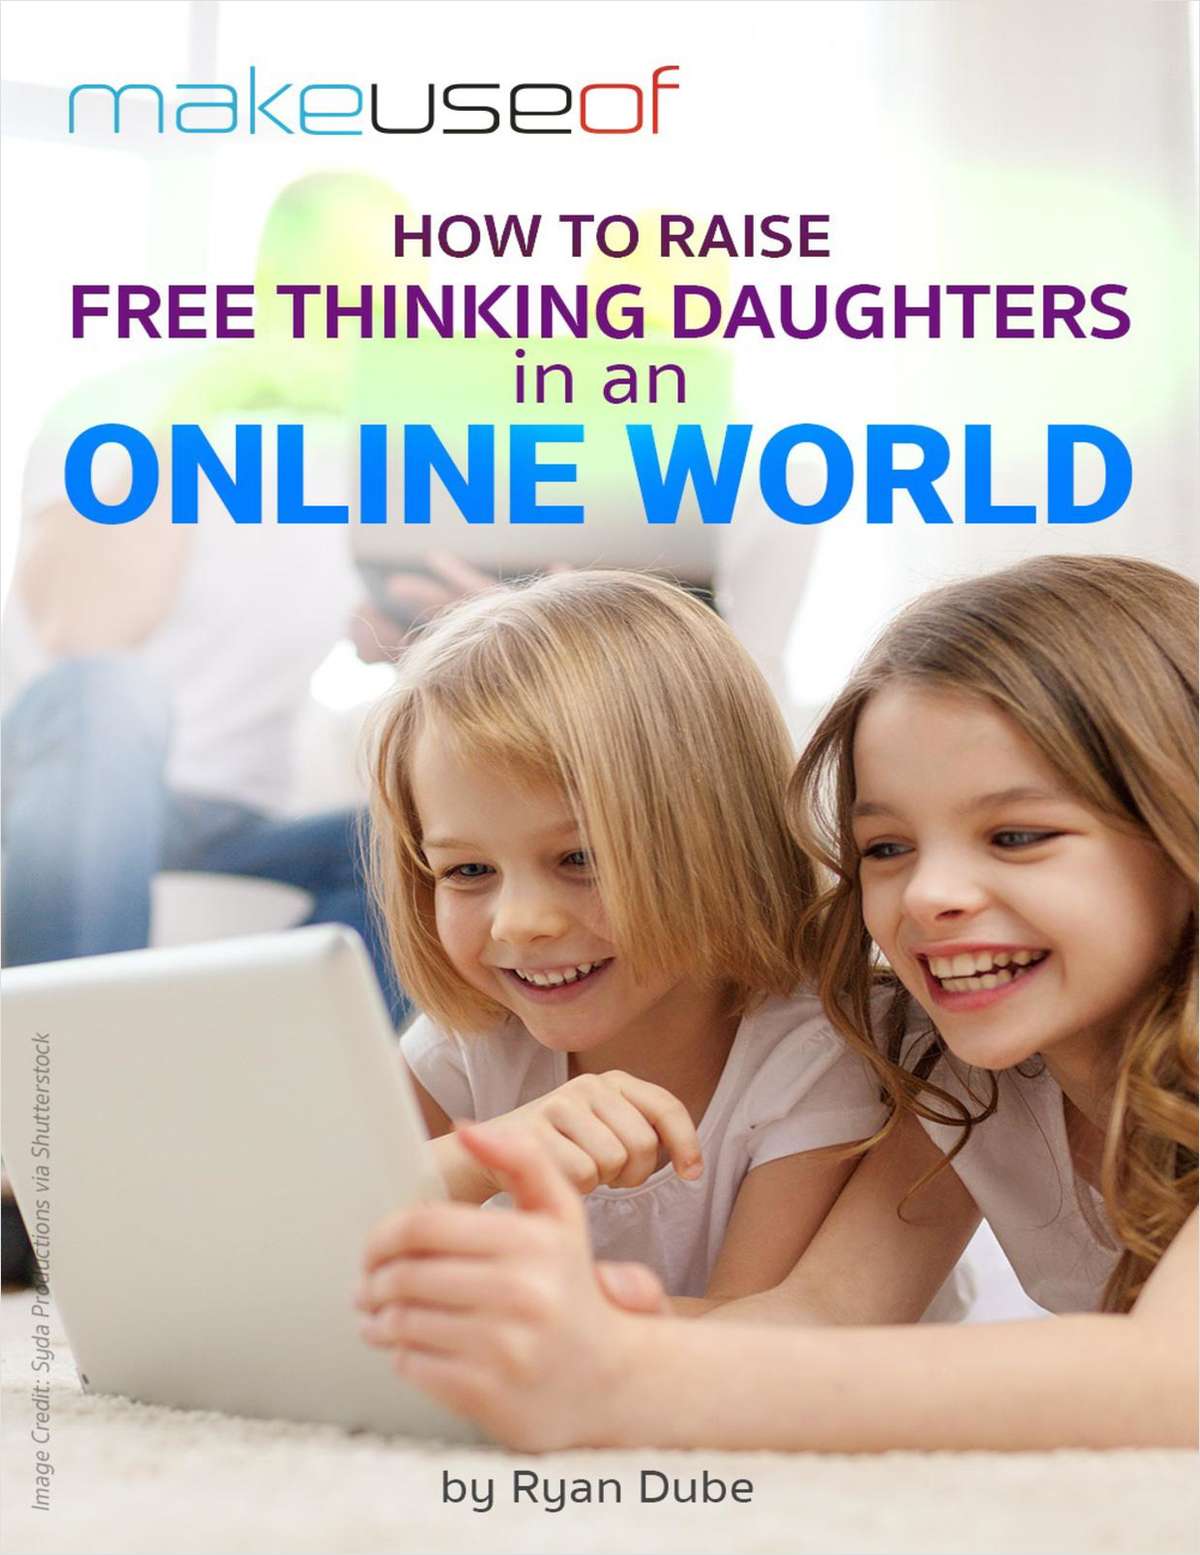 How to Raise Free Thinking Daughters in an Online World